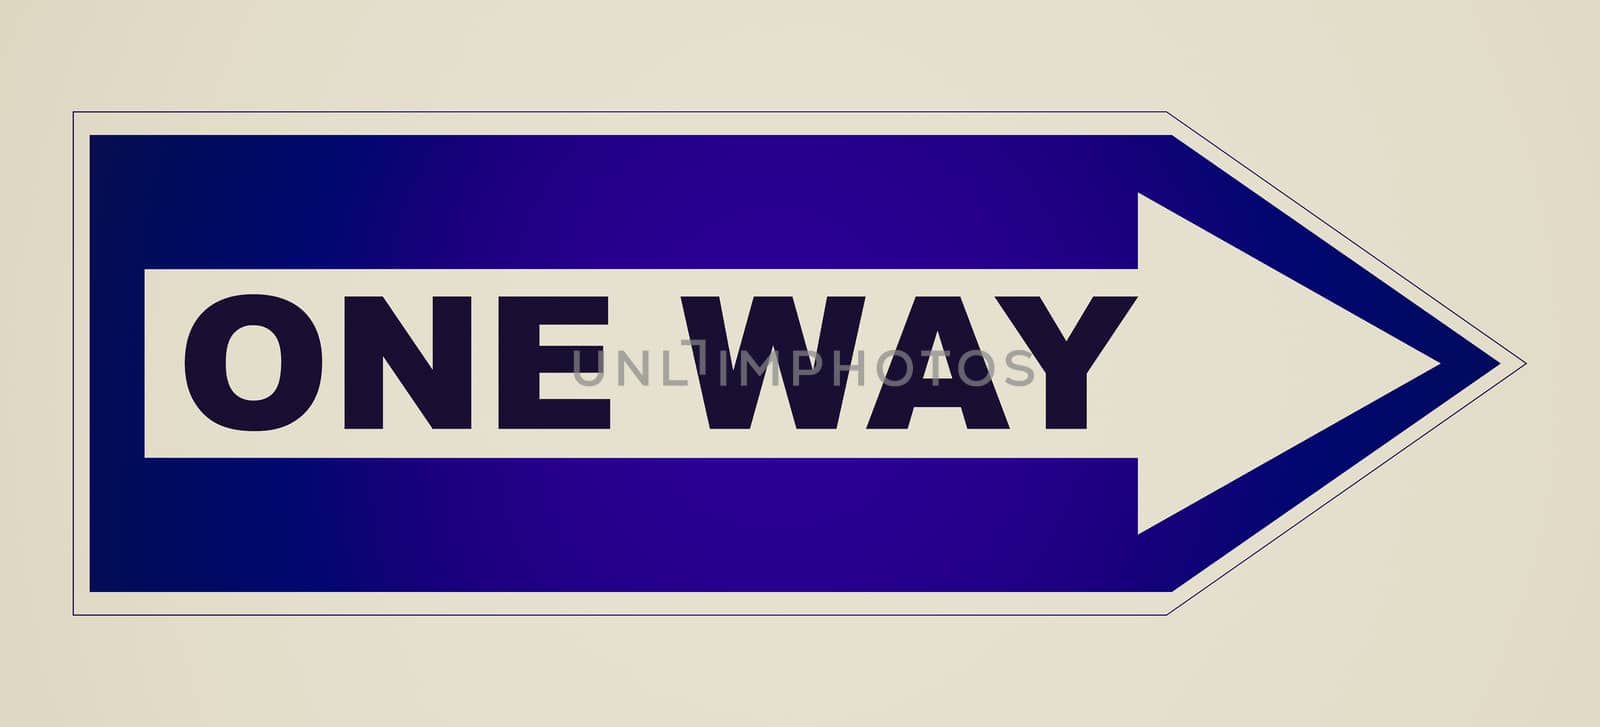 Retro looking One way traffic sign isolated